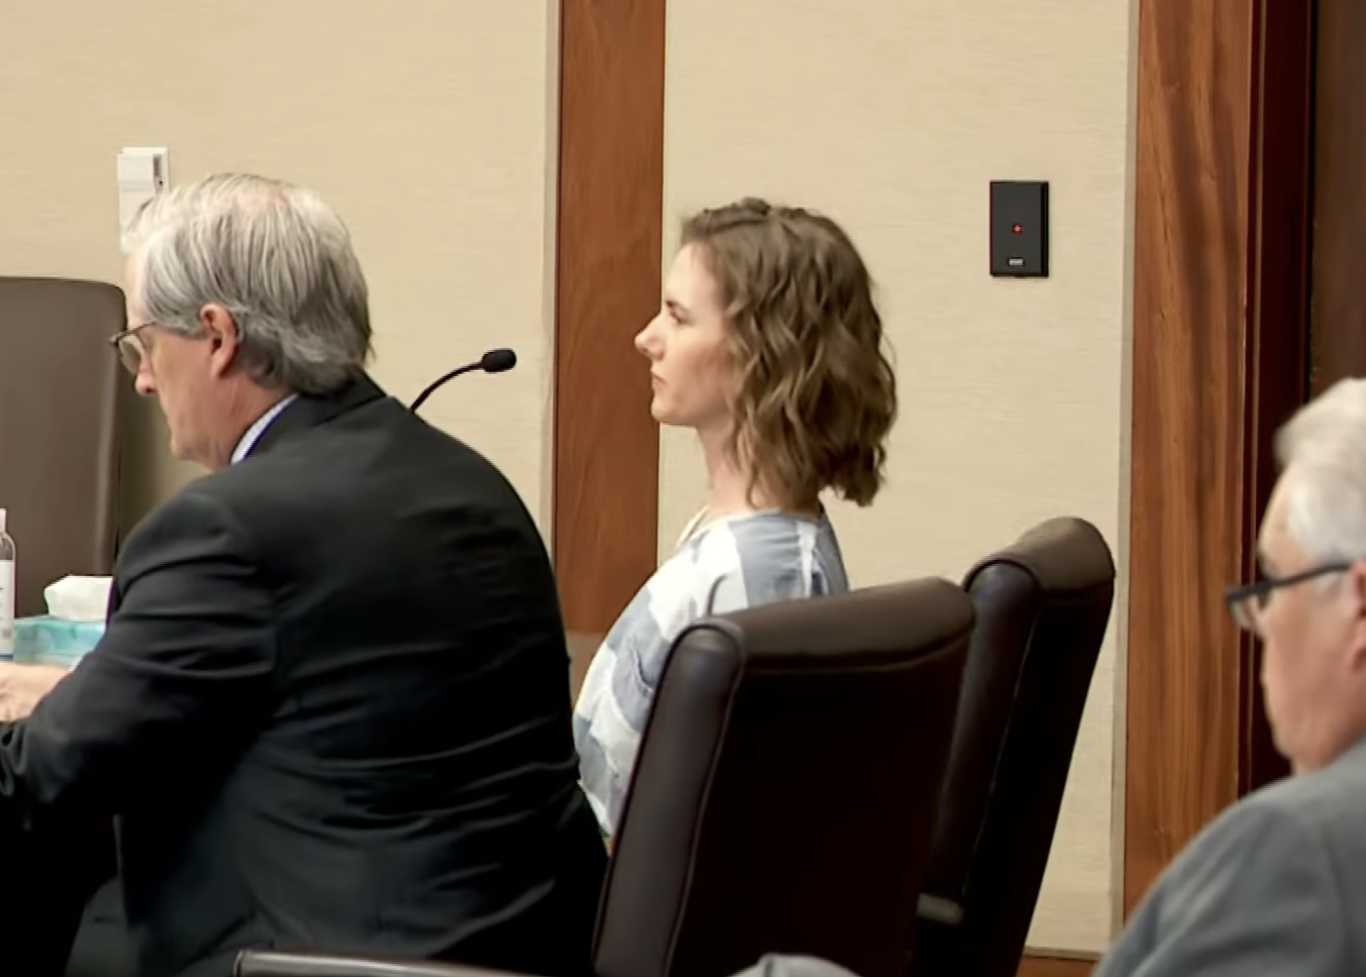 Side profile of Ruby Franke at a sentencing hearing, seated next to an attorney, with onlookers in the background